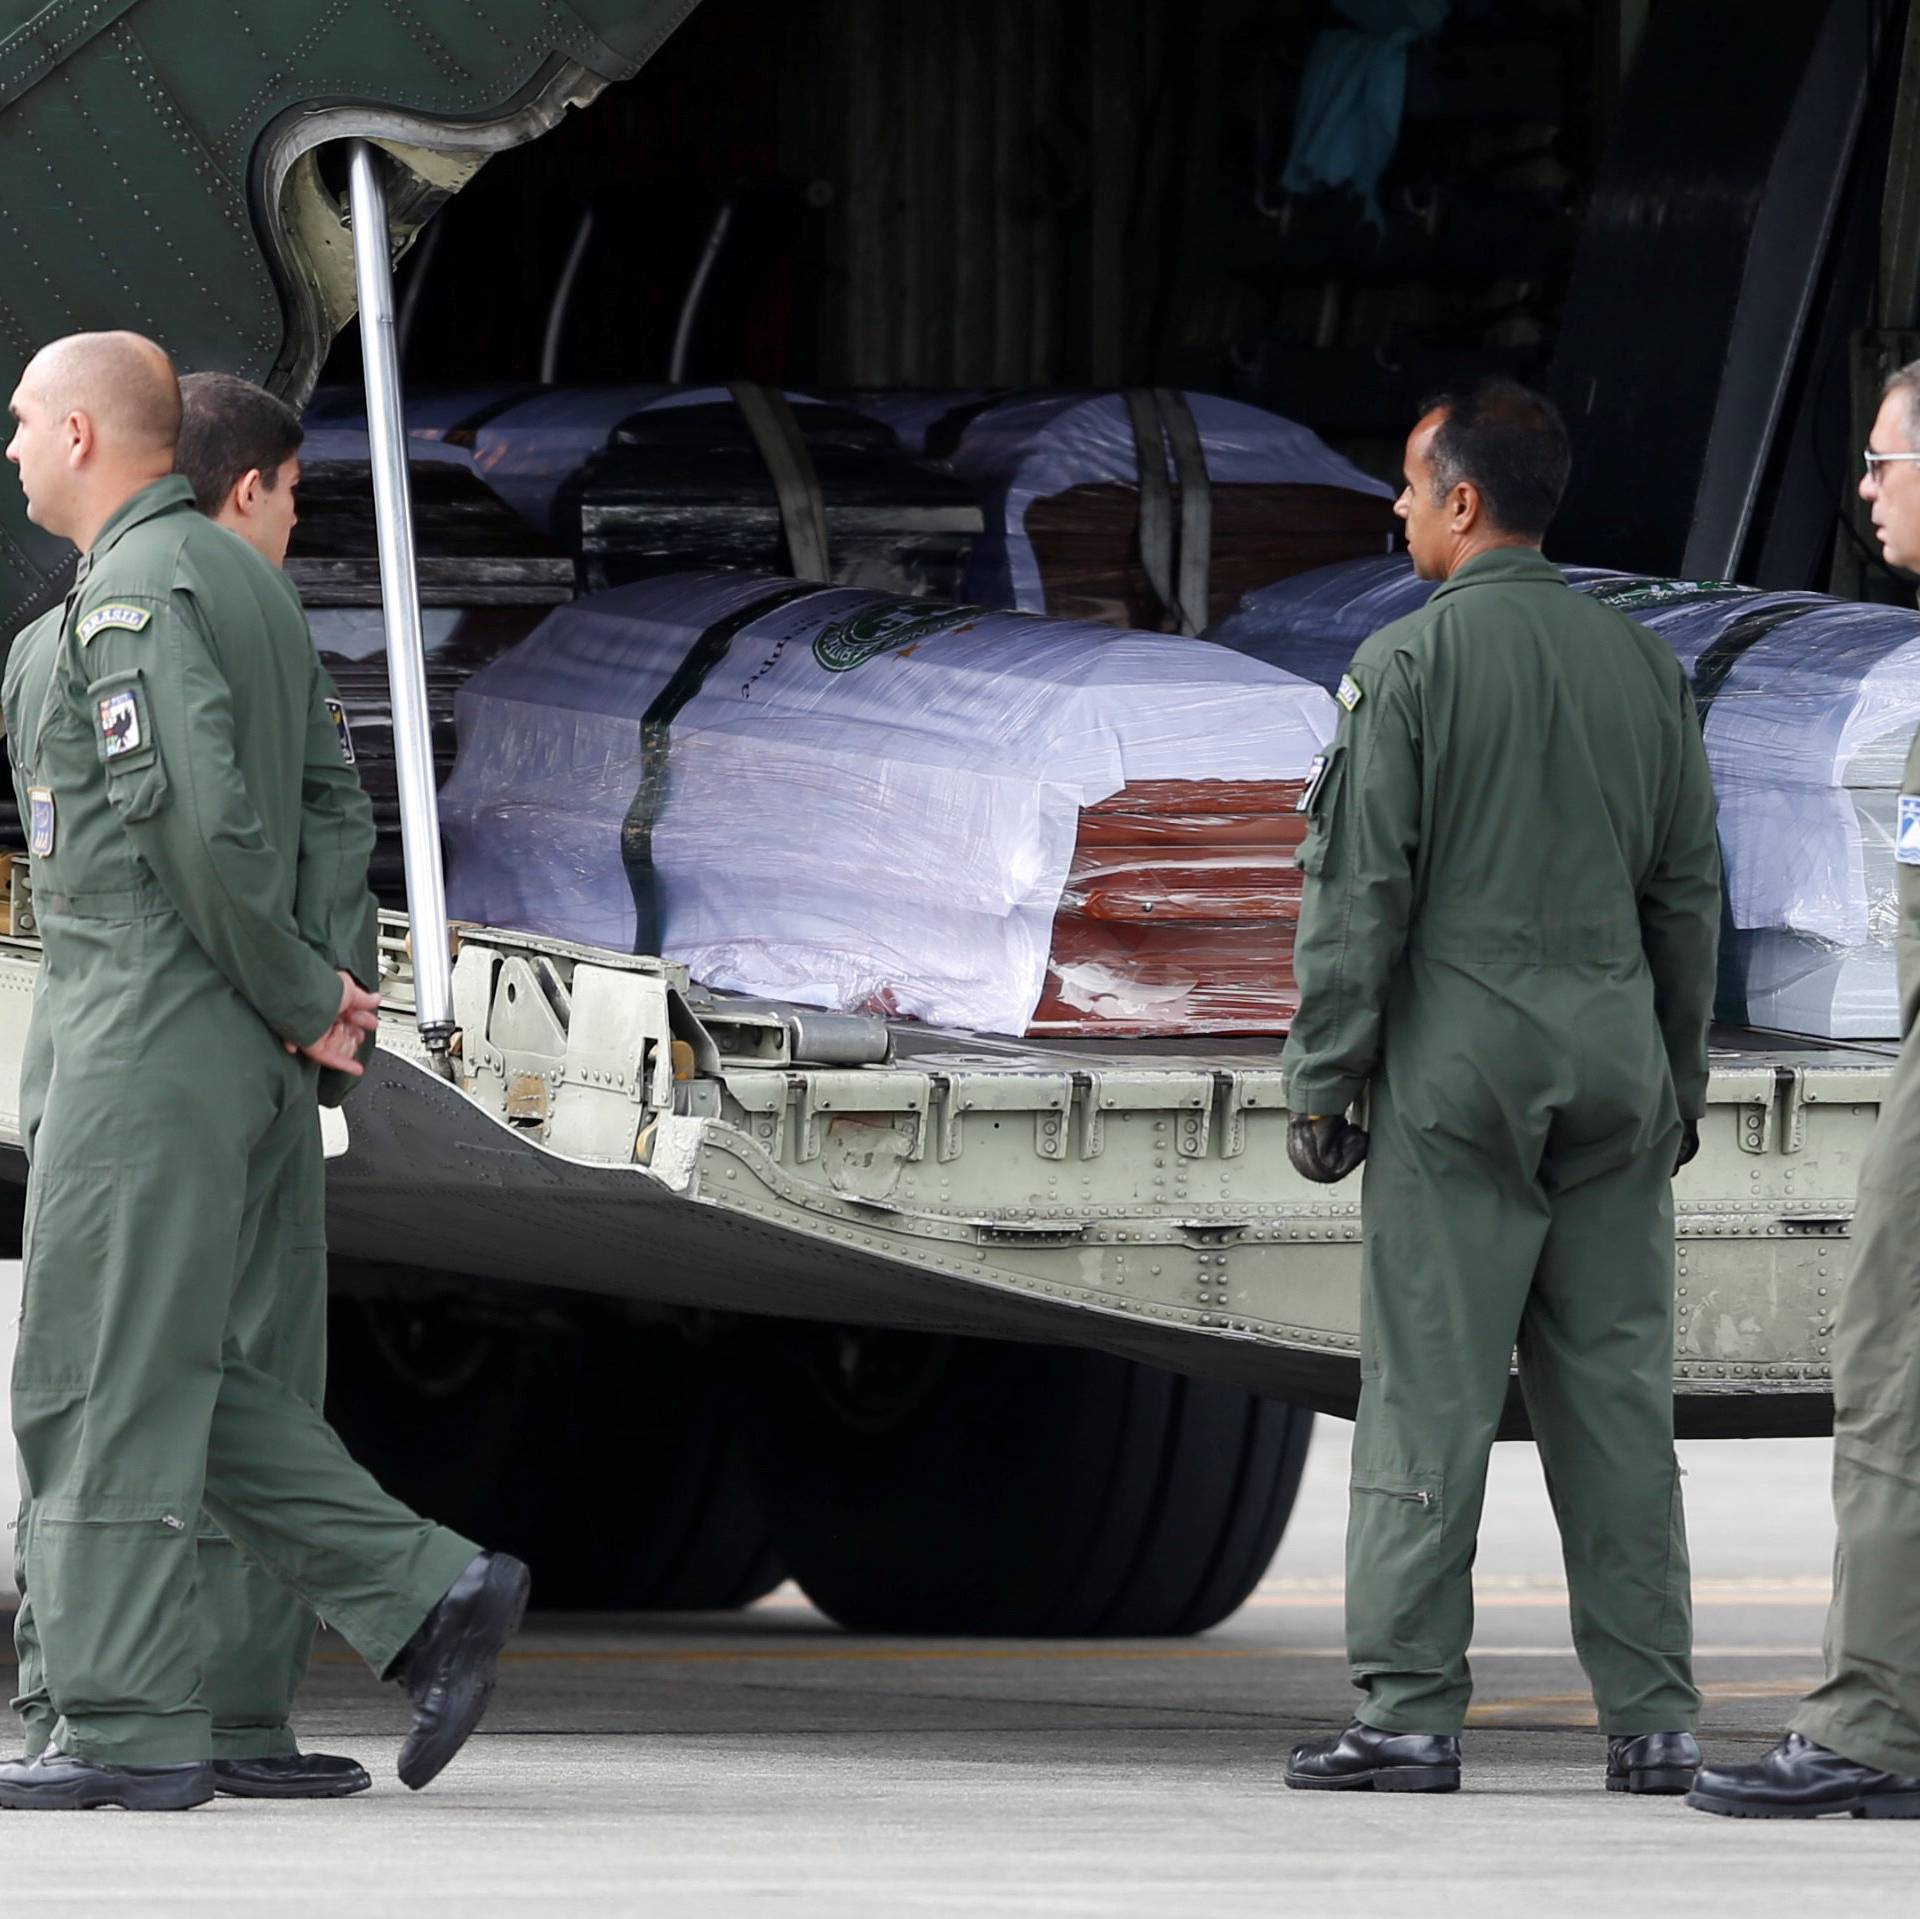 Coffins with the remains of Brazilian victims who died in an accident of the plane that crashed into the Colombian jungle with Brazilian soccer team Chapecoense are pictured, at the airport from where the bodies will be flown home to Brazil, in Medellin